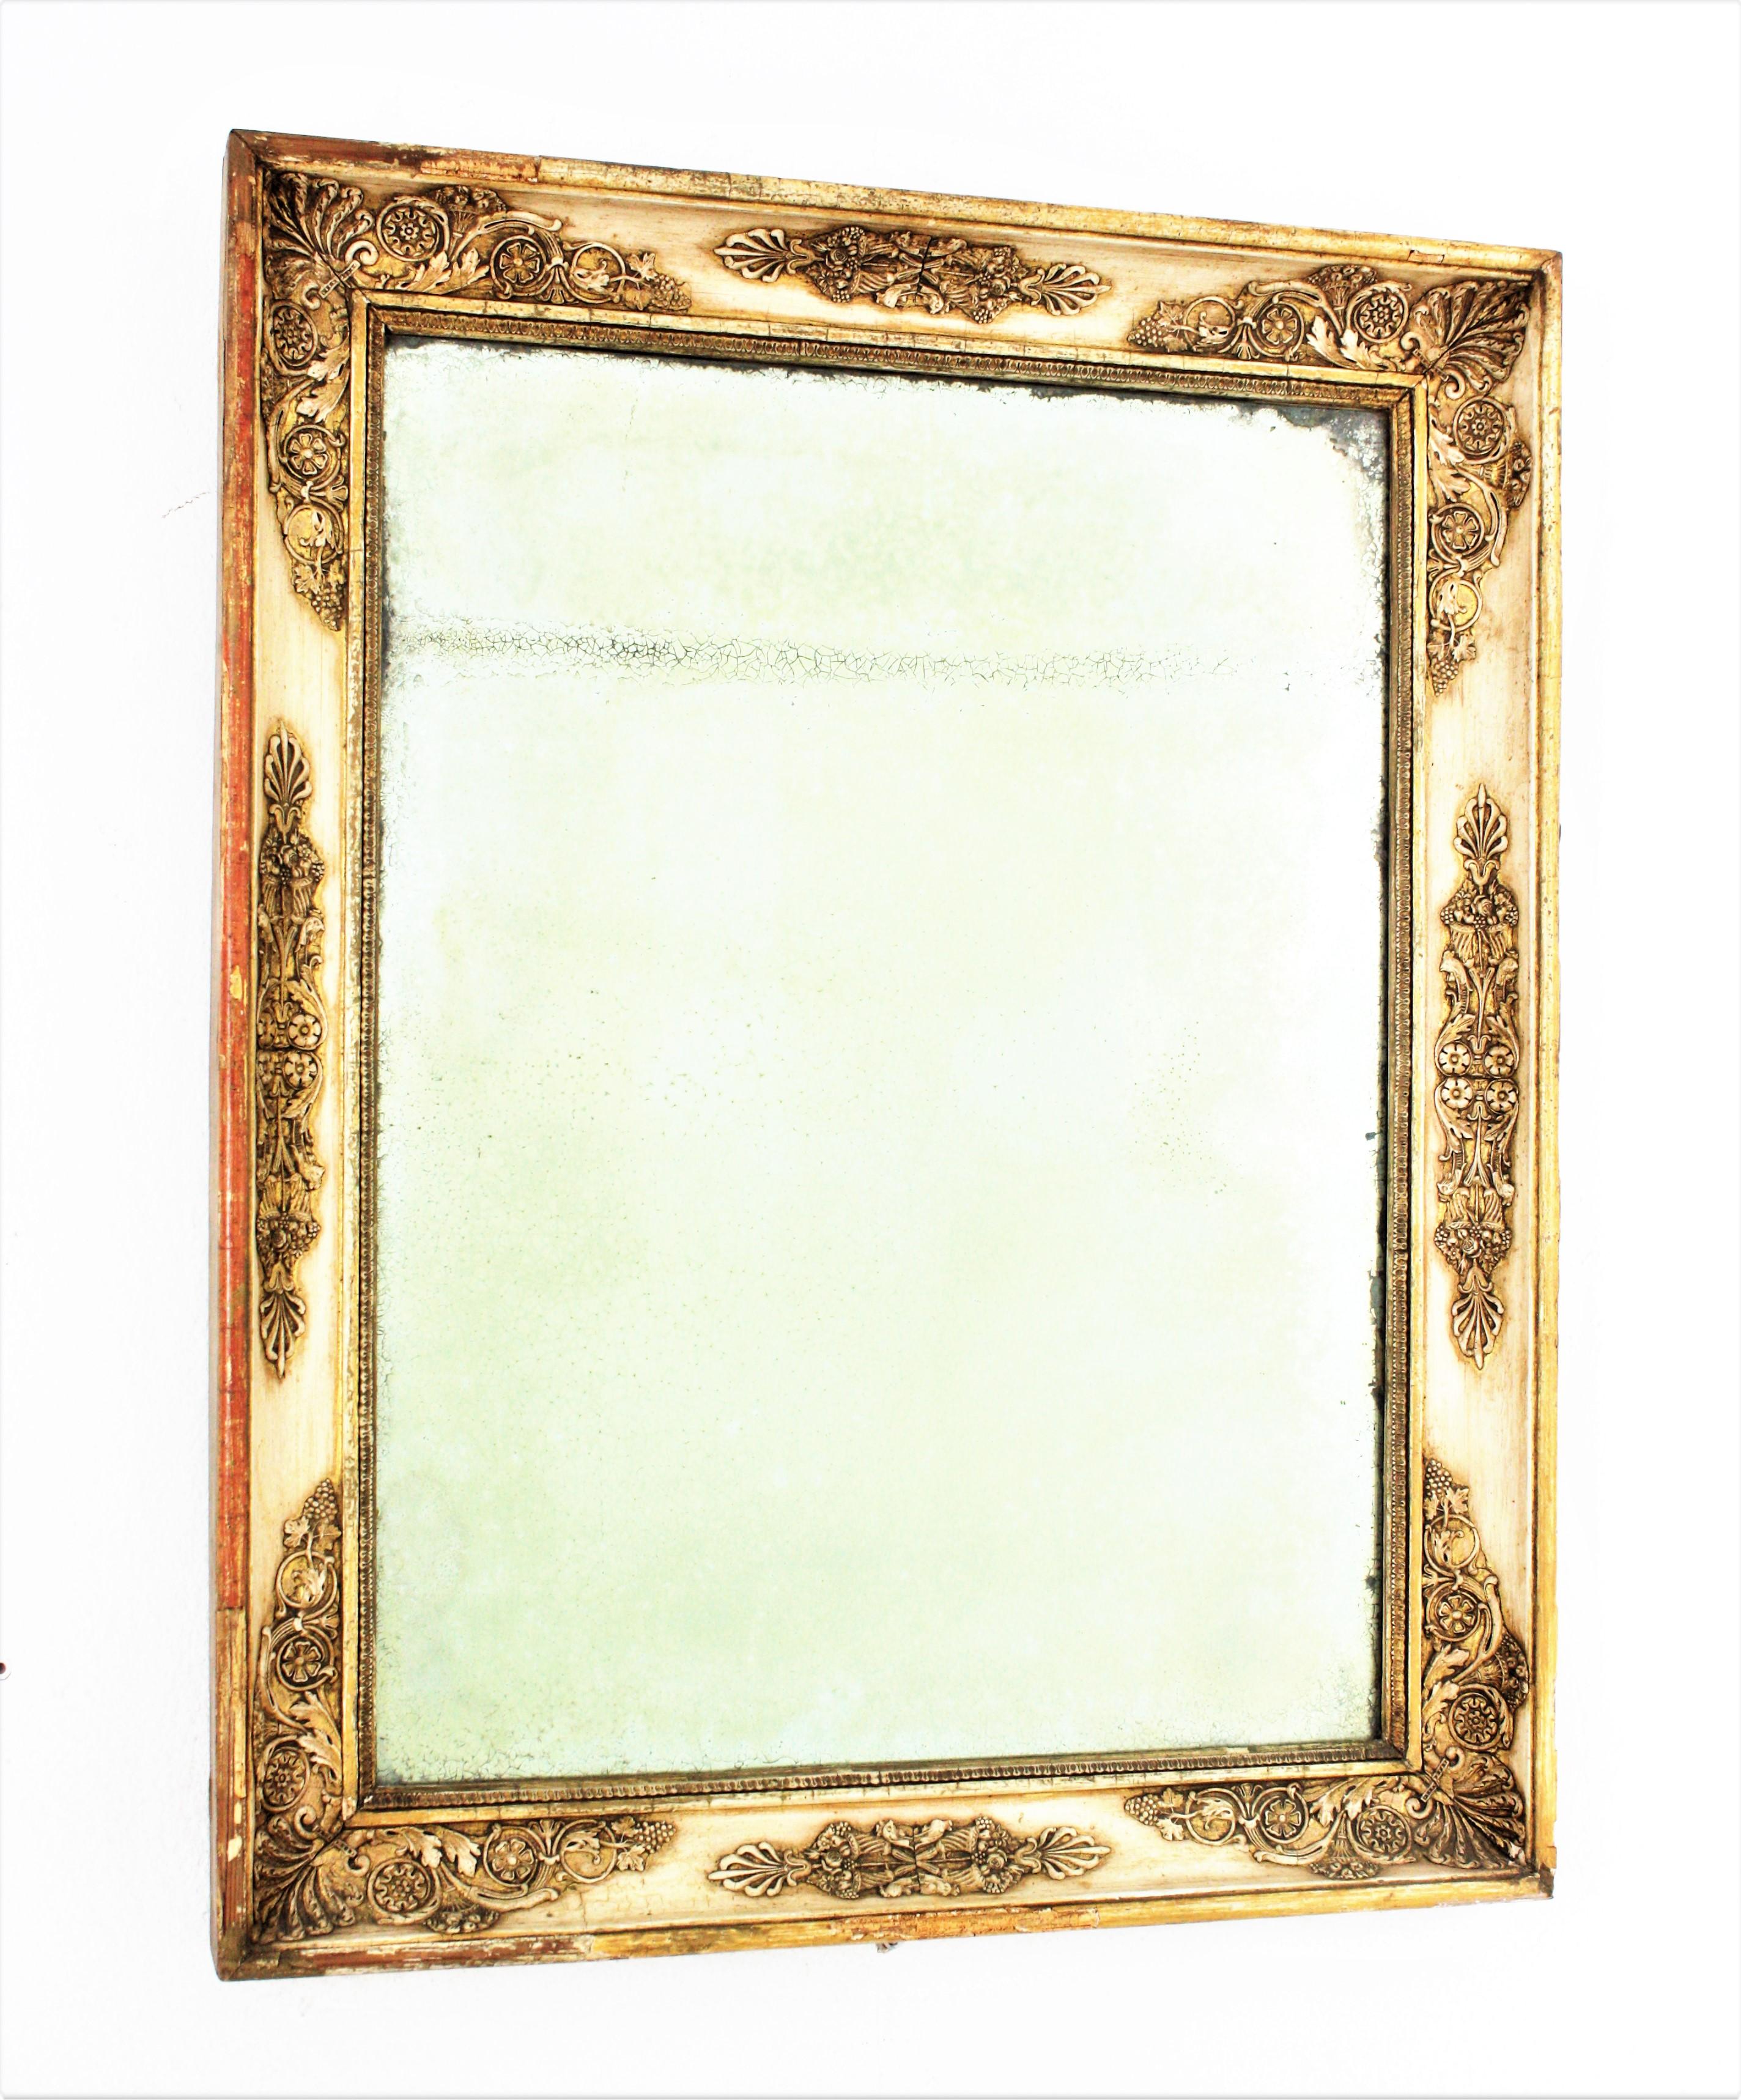 Empire Style mirror, France, 1930s.
Beautiful Empire style rectangular mirror in beige patina with neoclassical relief foliage and floral ornamentation with gilded details . 
The frame has a terrific aged patina showing some redish accents and the